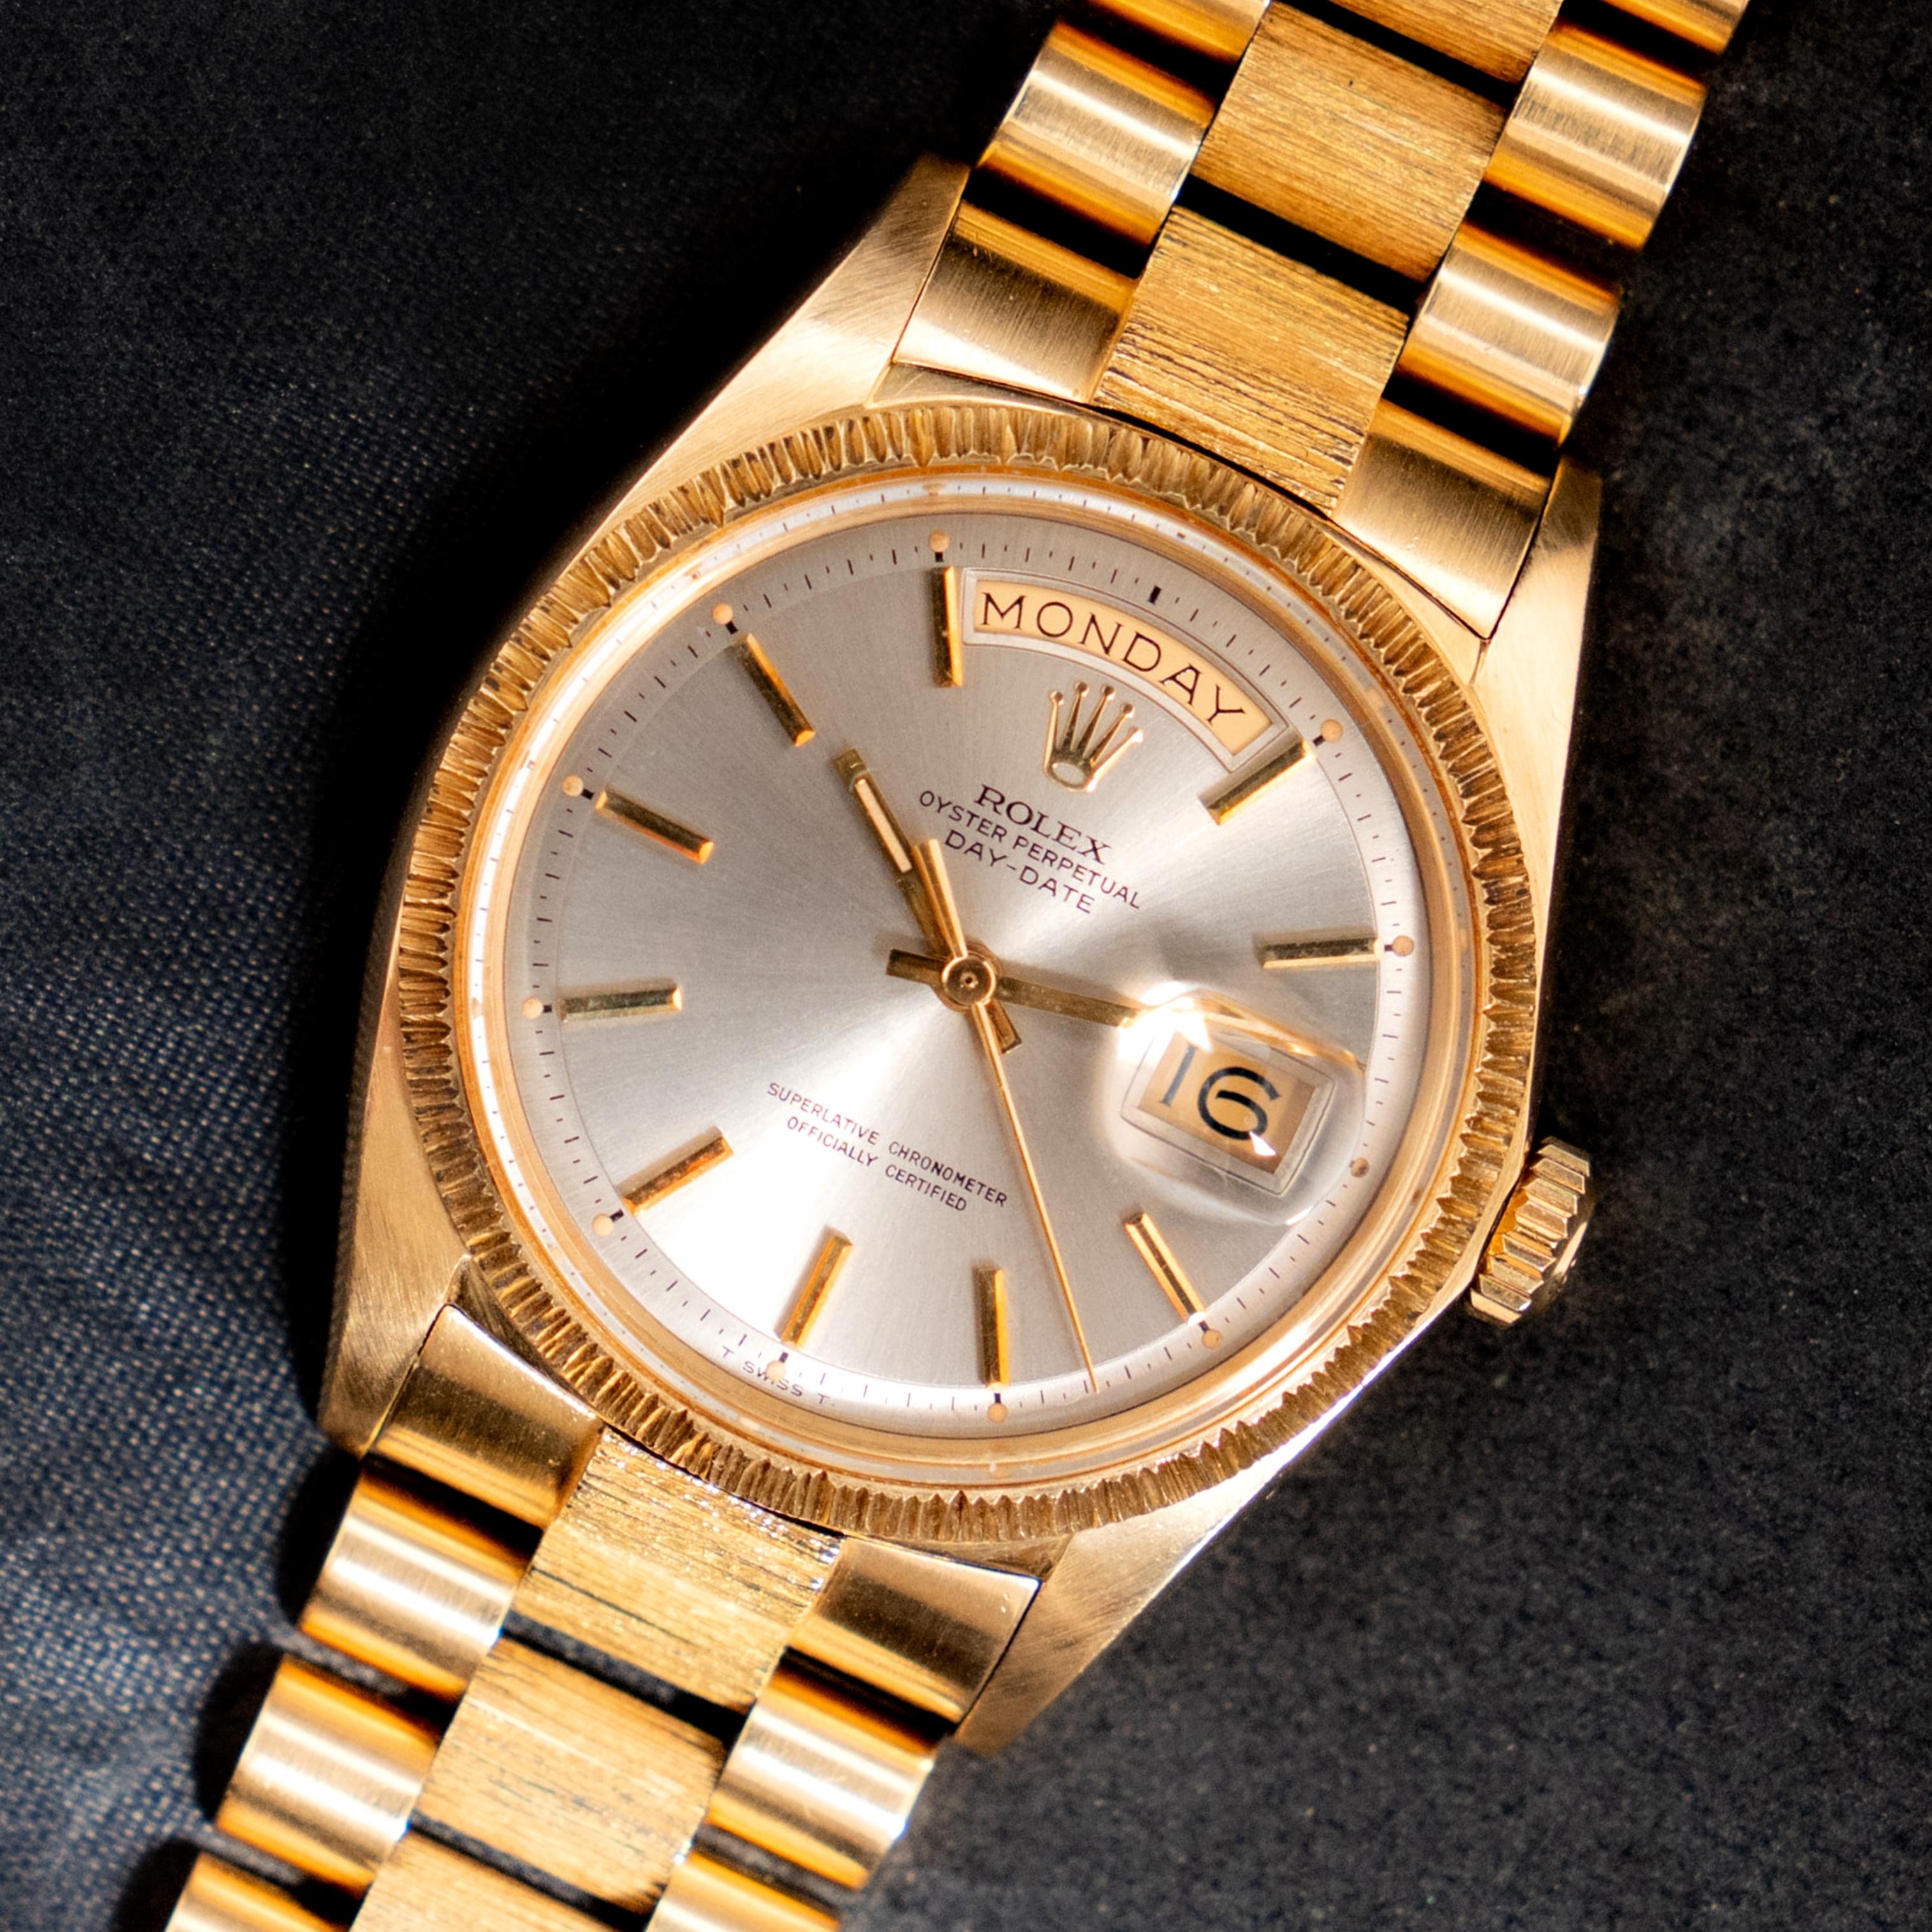 Brand: Vintage Rolex
Model: 1807
Year: 1970
Serial number: 25xxxxx
Reference: C03925; C03945

Case: 18K Yellow gold 36mm without crown; Show sign of wear with slight polish from previous; inner case back stamped 1803

Dial: Excellent Aged Condition